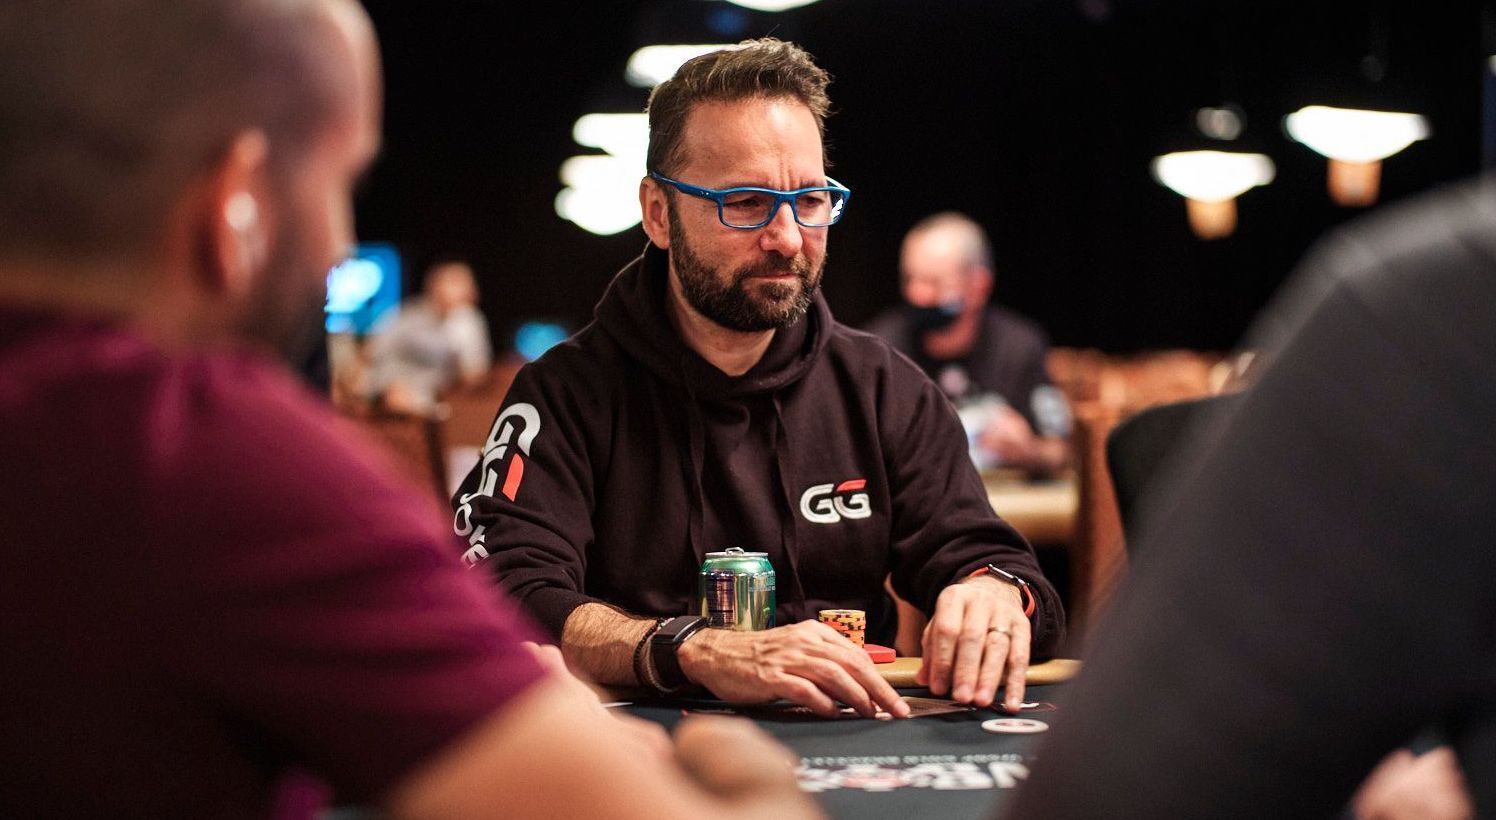 Poker Pro Daniel Negreanu Ends Dry Spell With Super High Roller Bowl Victory